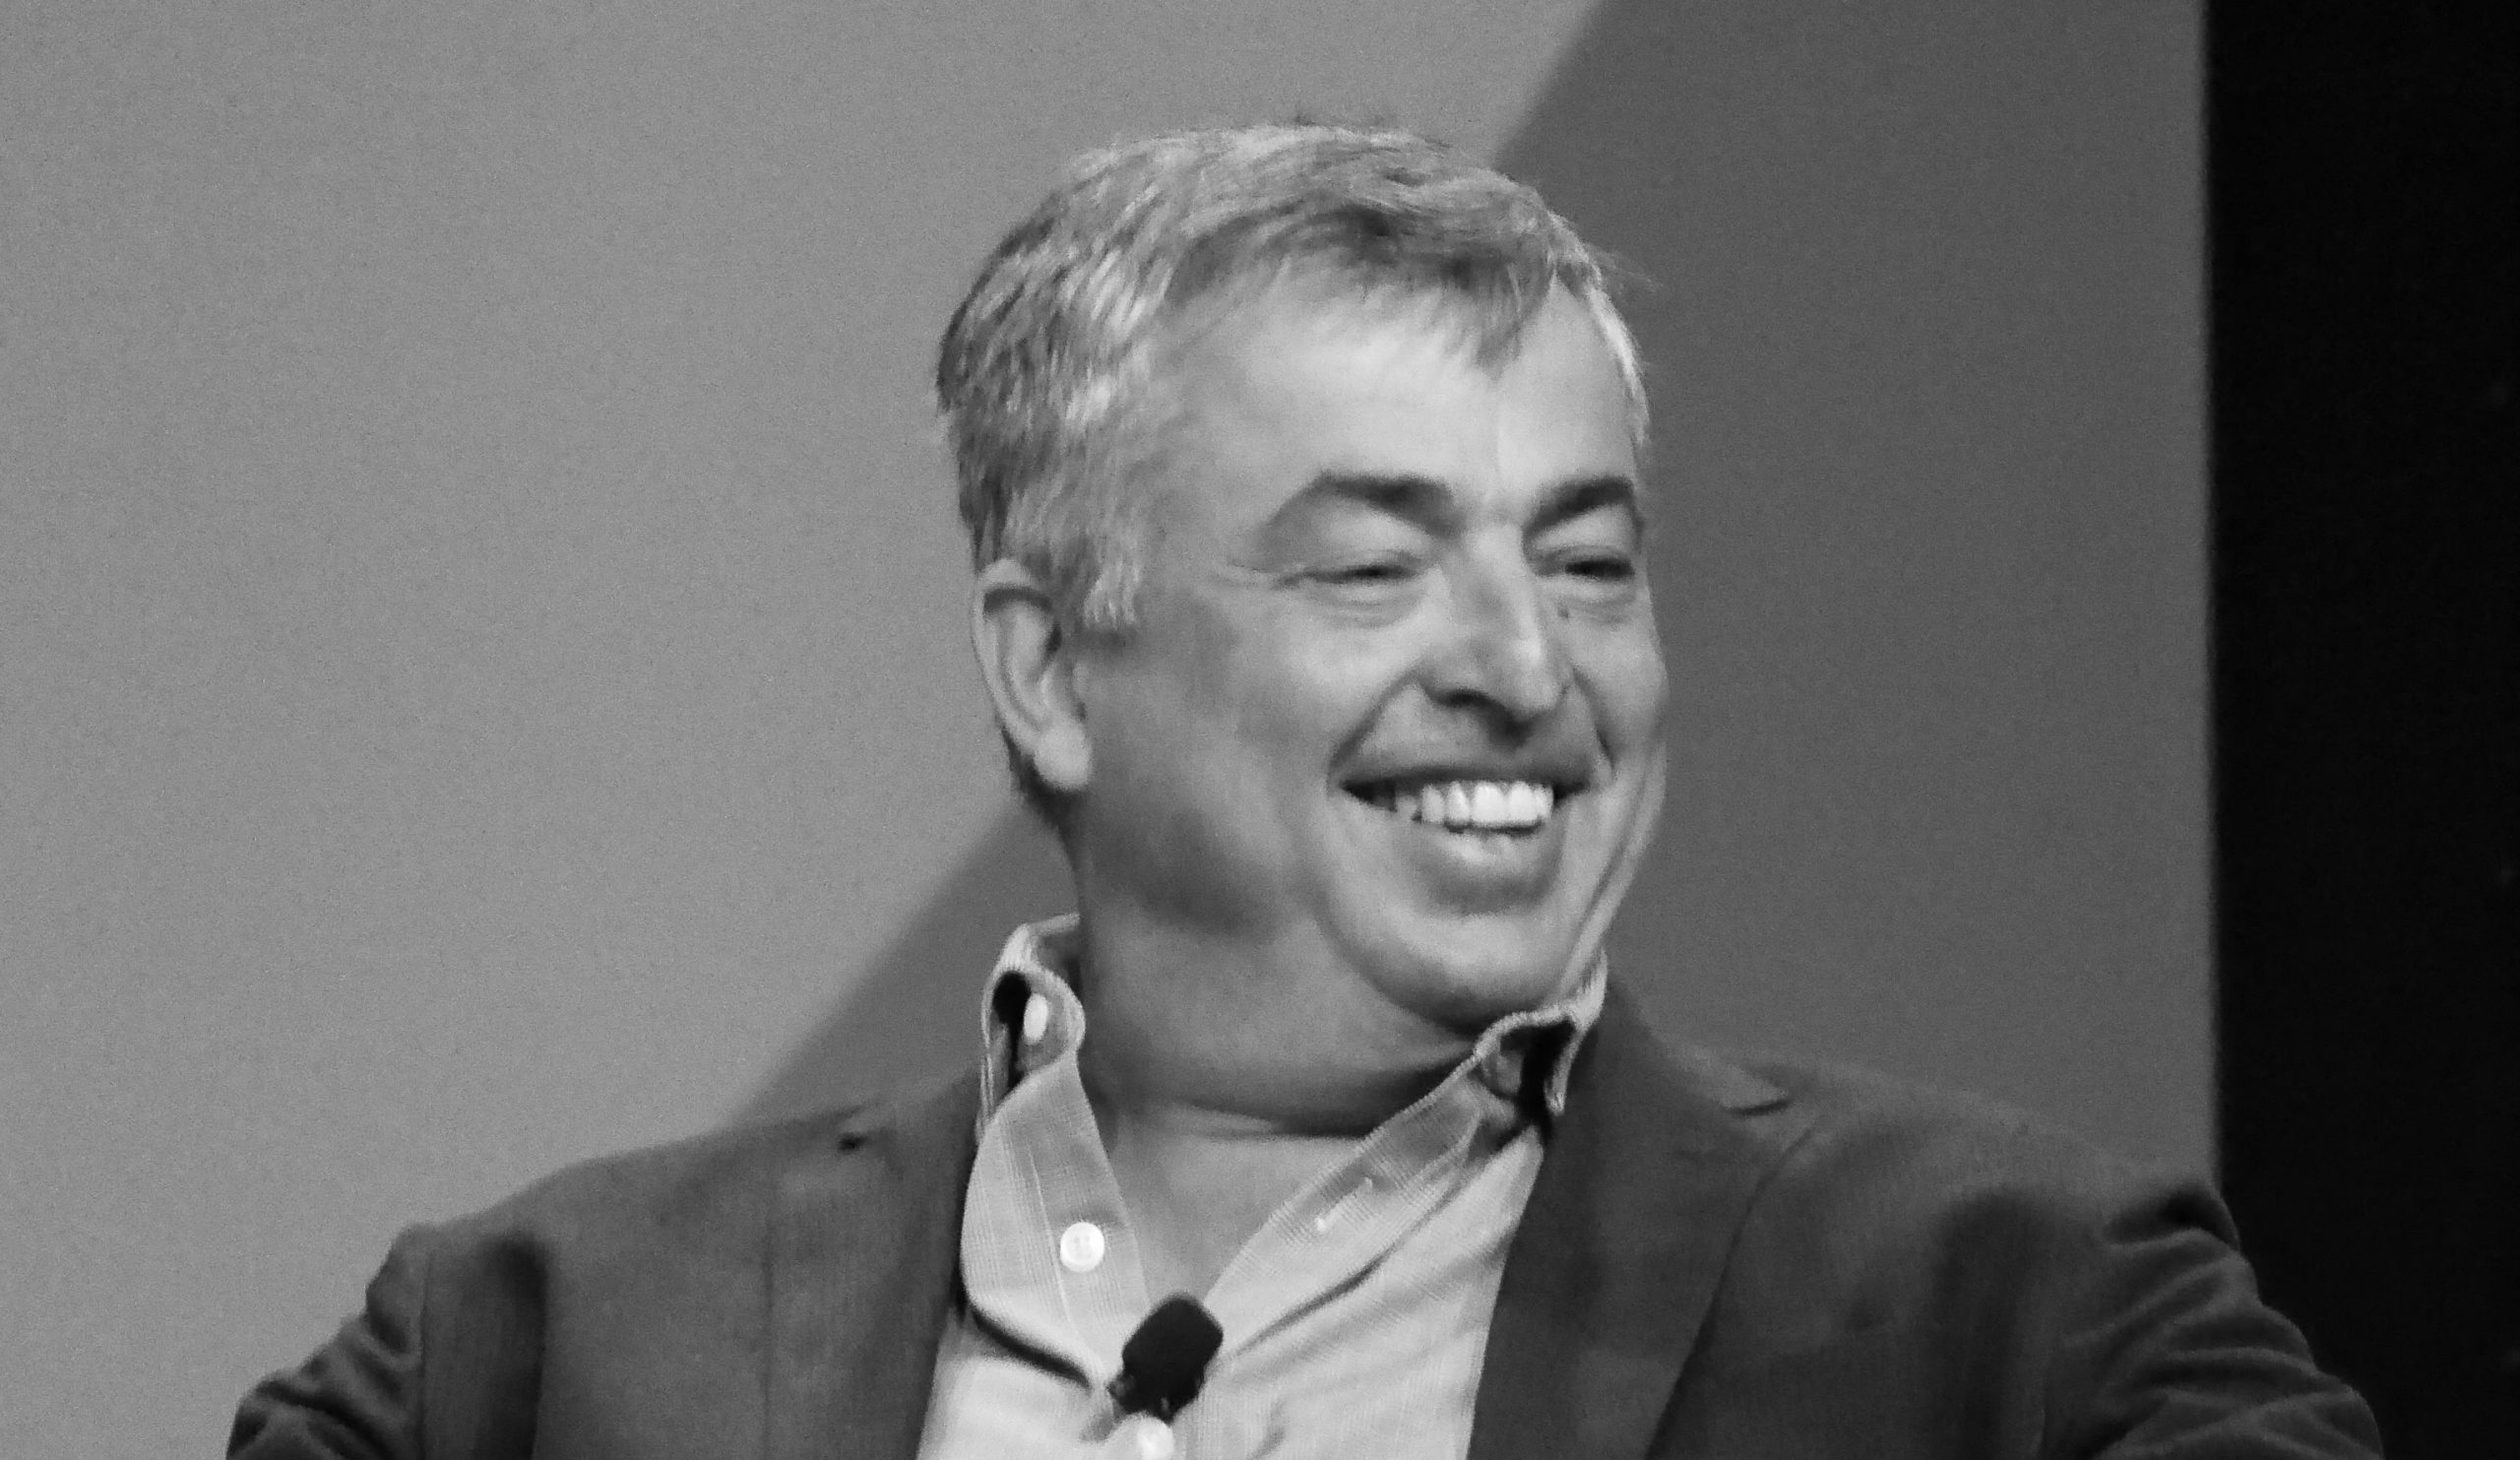 Apple exec Eddy Cue says 99/100 won’t tell the difference with Apple Music HiFi